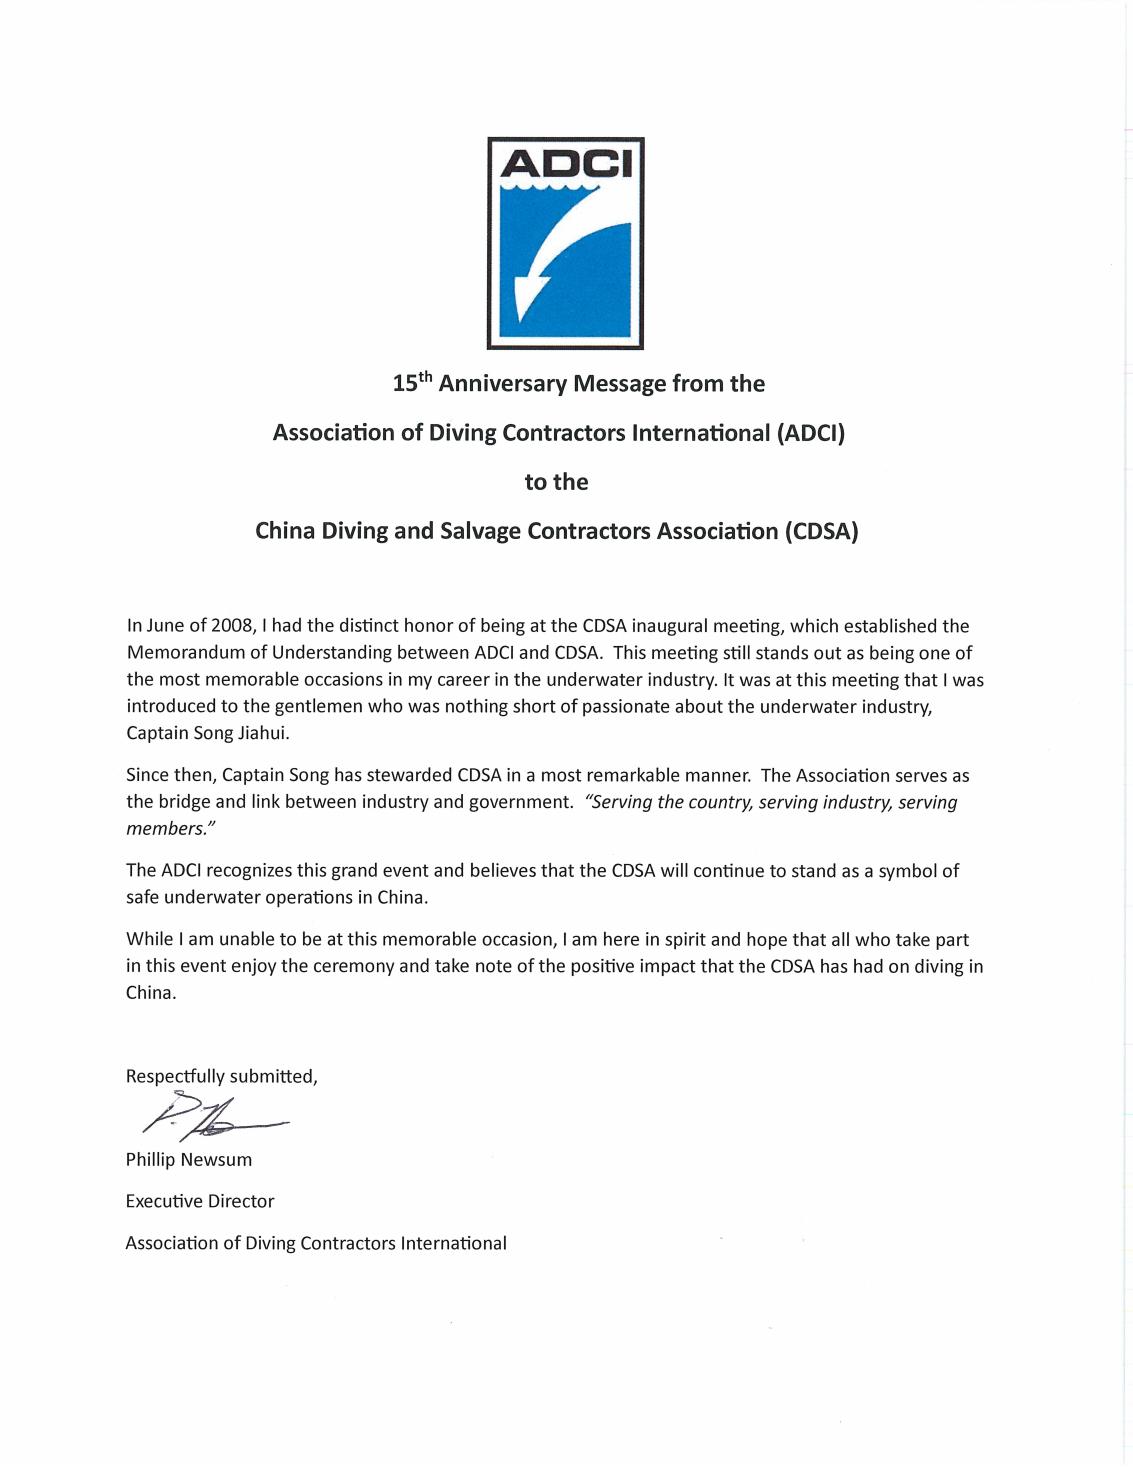 15th Anniversary Message from ADCI to CDSA - 29MAY2023_00.jpg